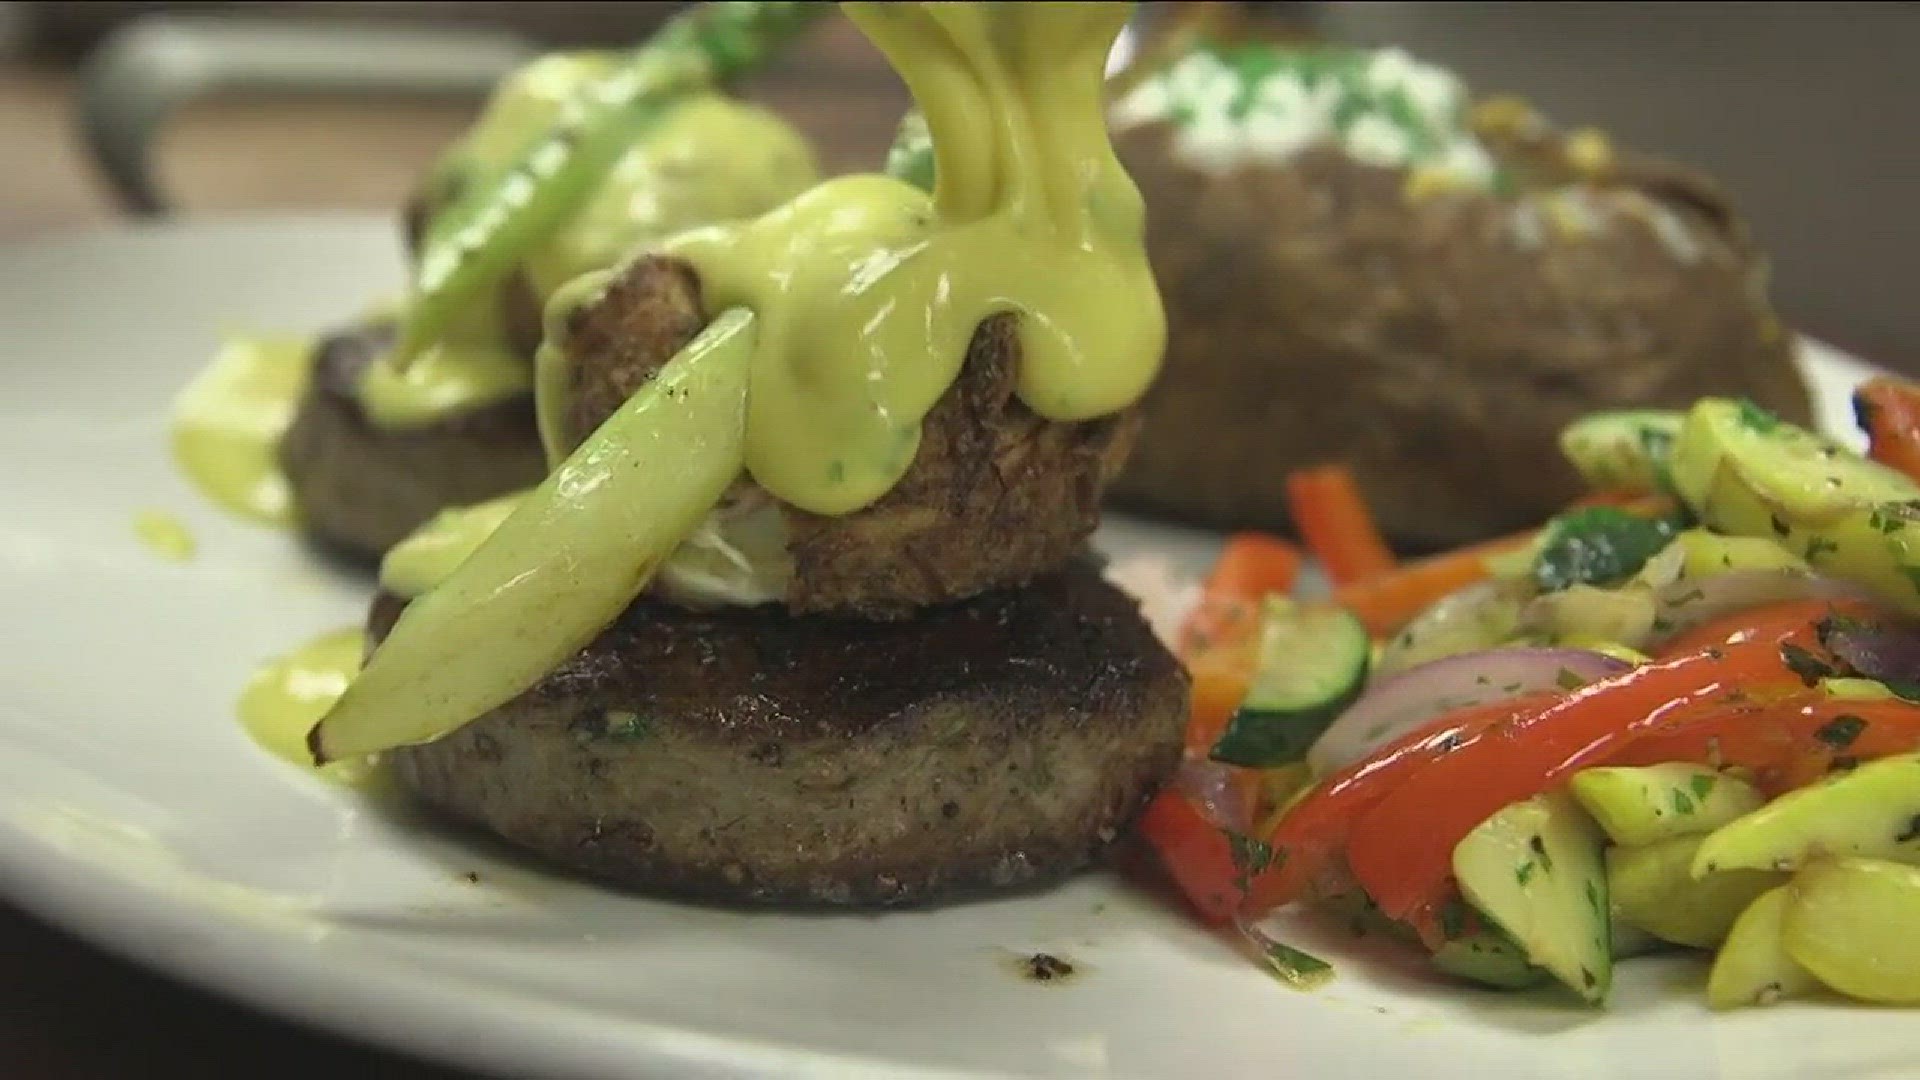 The delicious Steak Oscar, one of the many culinary creations waiting for you at Delta Downs!